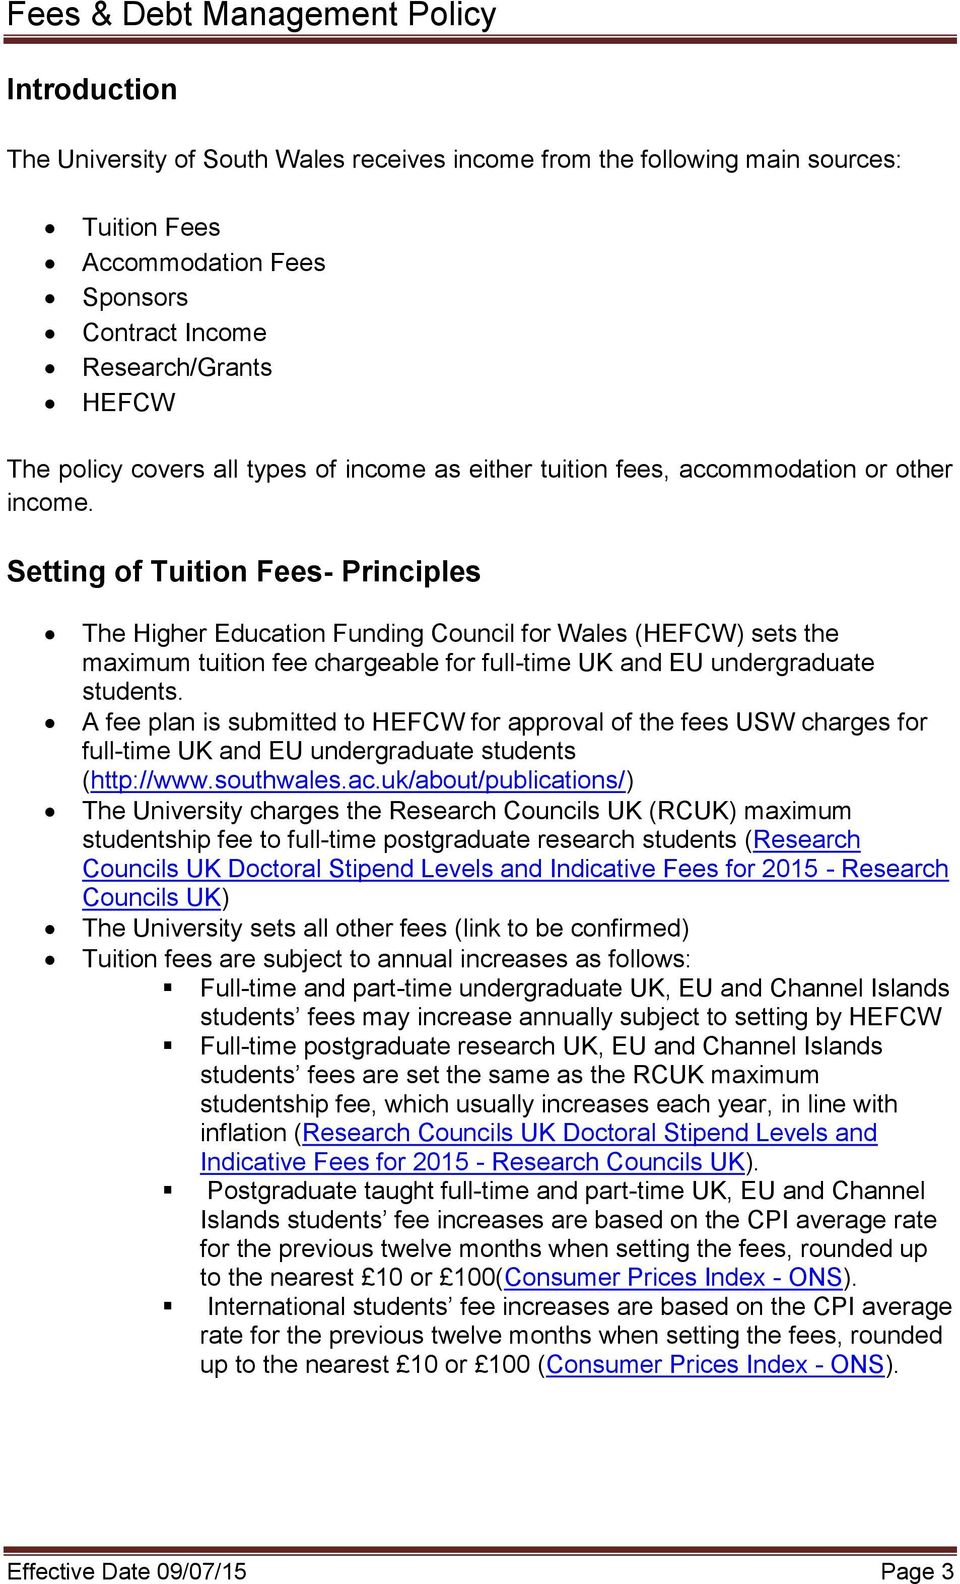 Setting of Tuition Fees- Principles The Higher Education Funding Council for Wales (HEFCW) sets the maximum tuition fee chargeable for full-time UK and EU undergraduate students.